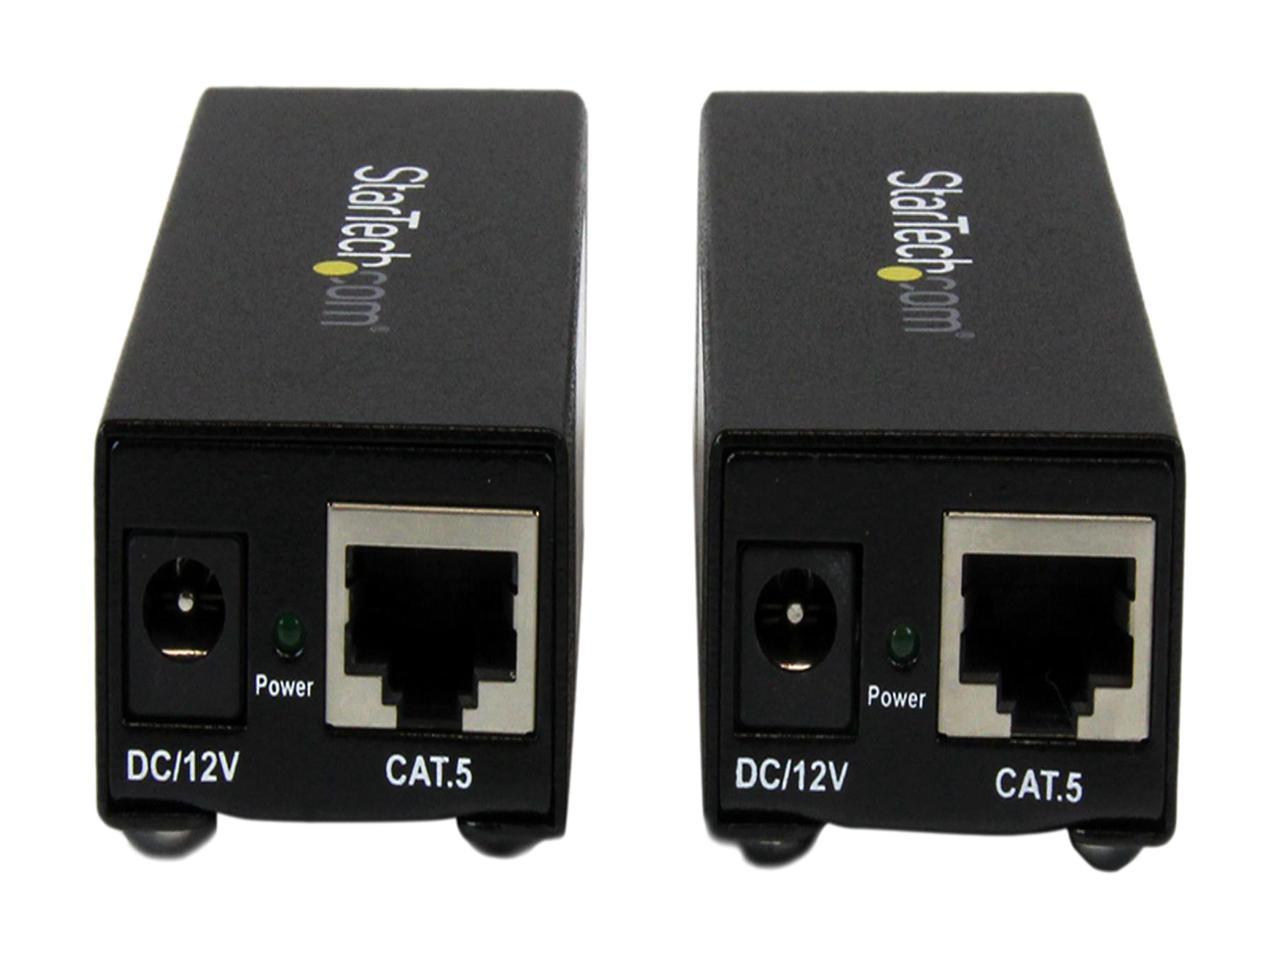 StarTech.com ST121UTPEP VGA to Cat 5 Monitor Extender Kit (250ft/80m) - VGA over Cat5 Video Extender - 1 Local and 1 Remote